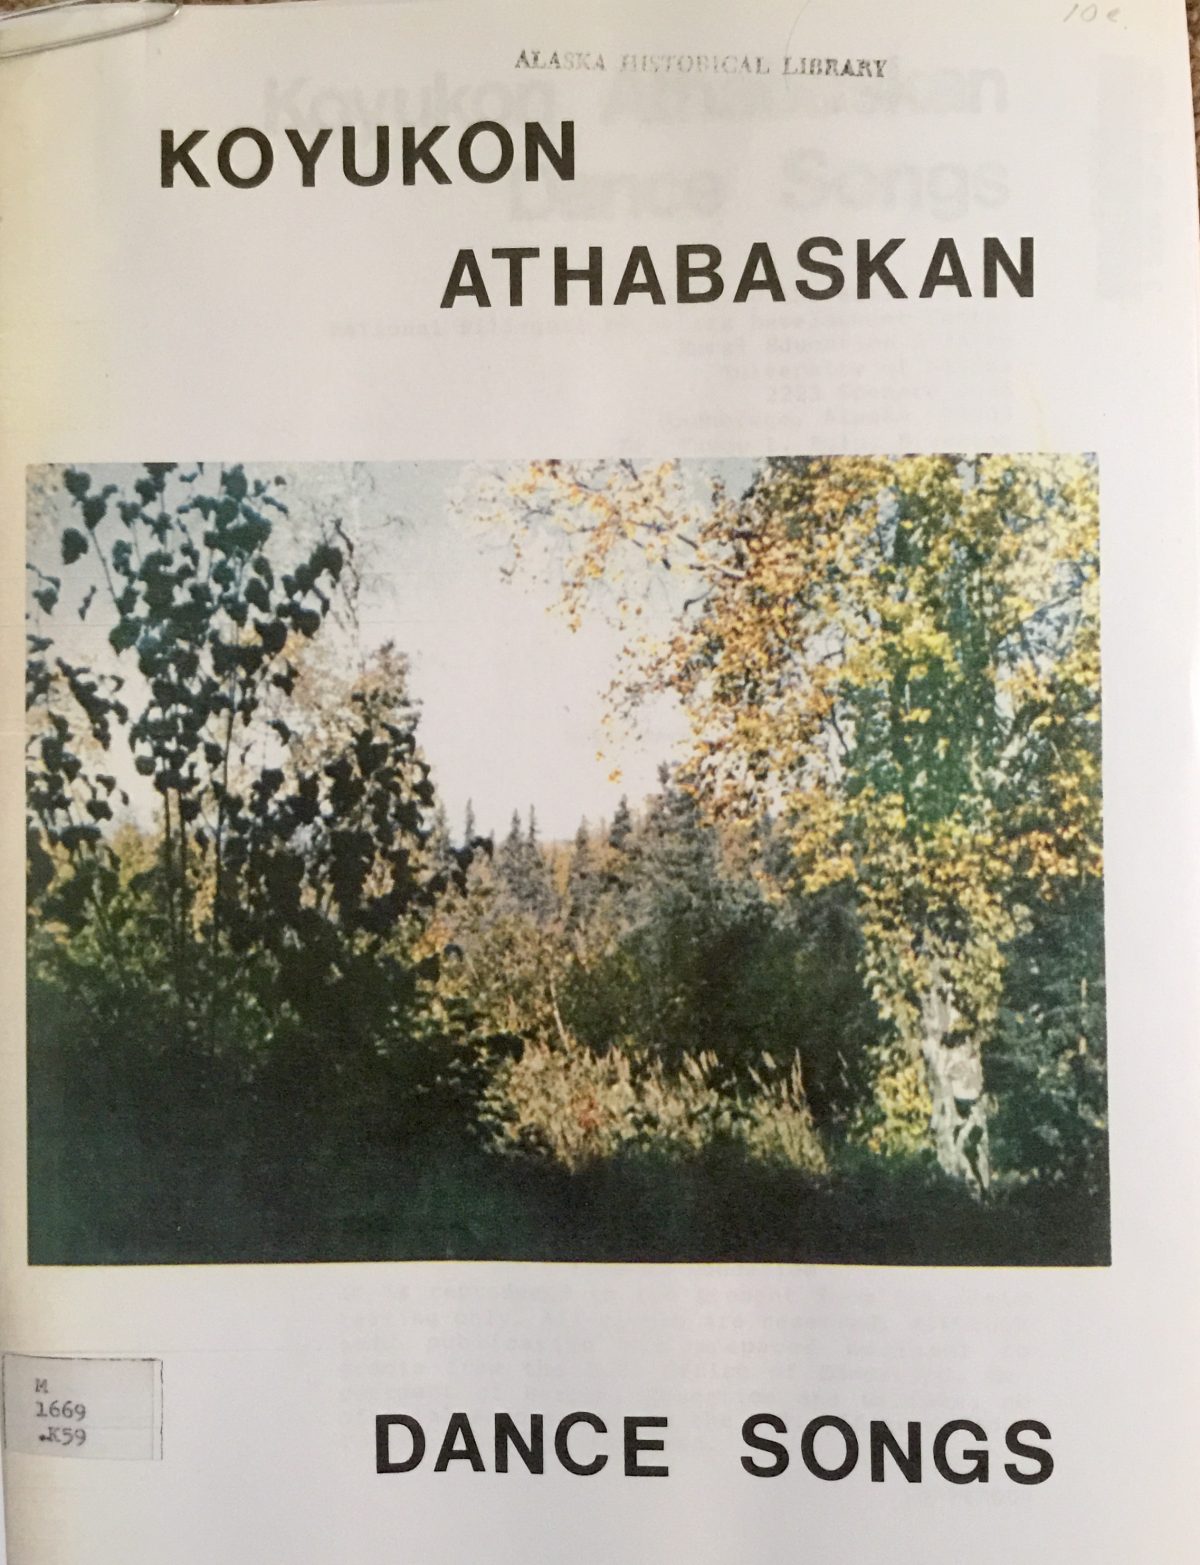 Athabaskan Fiddle History: 19th-early 20th century